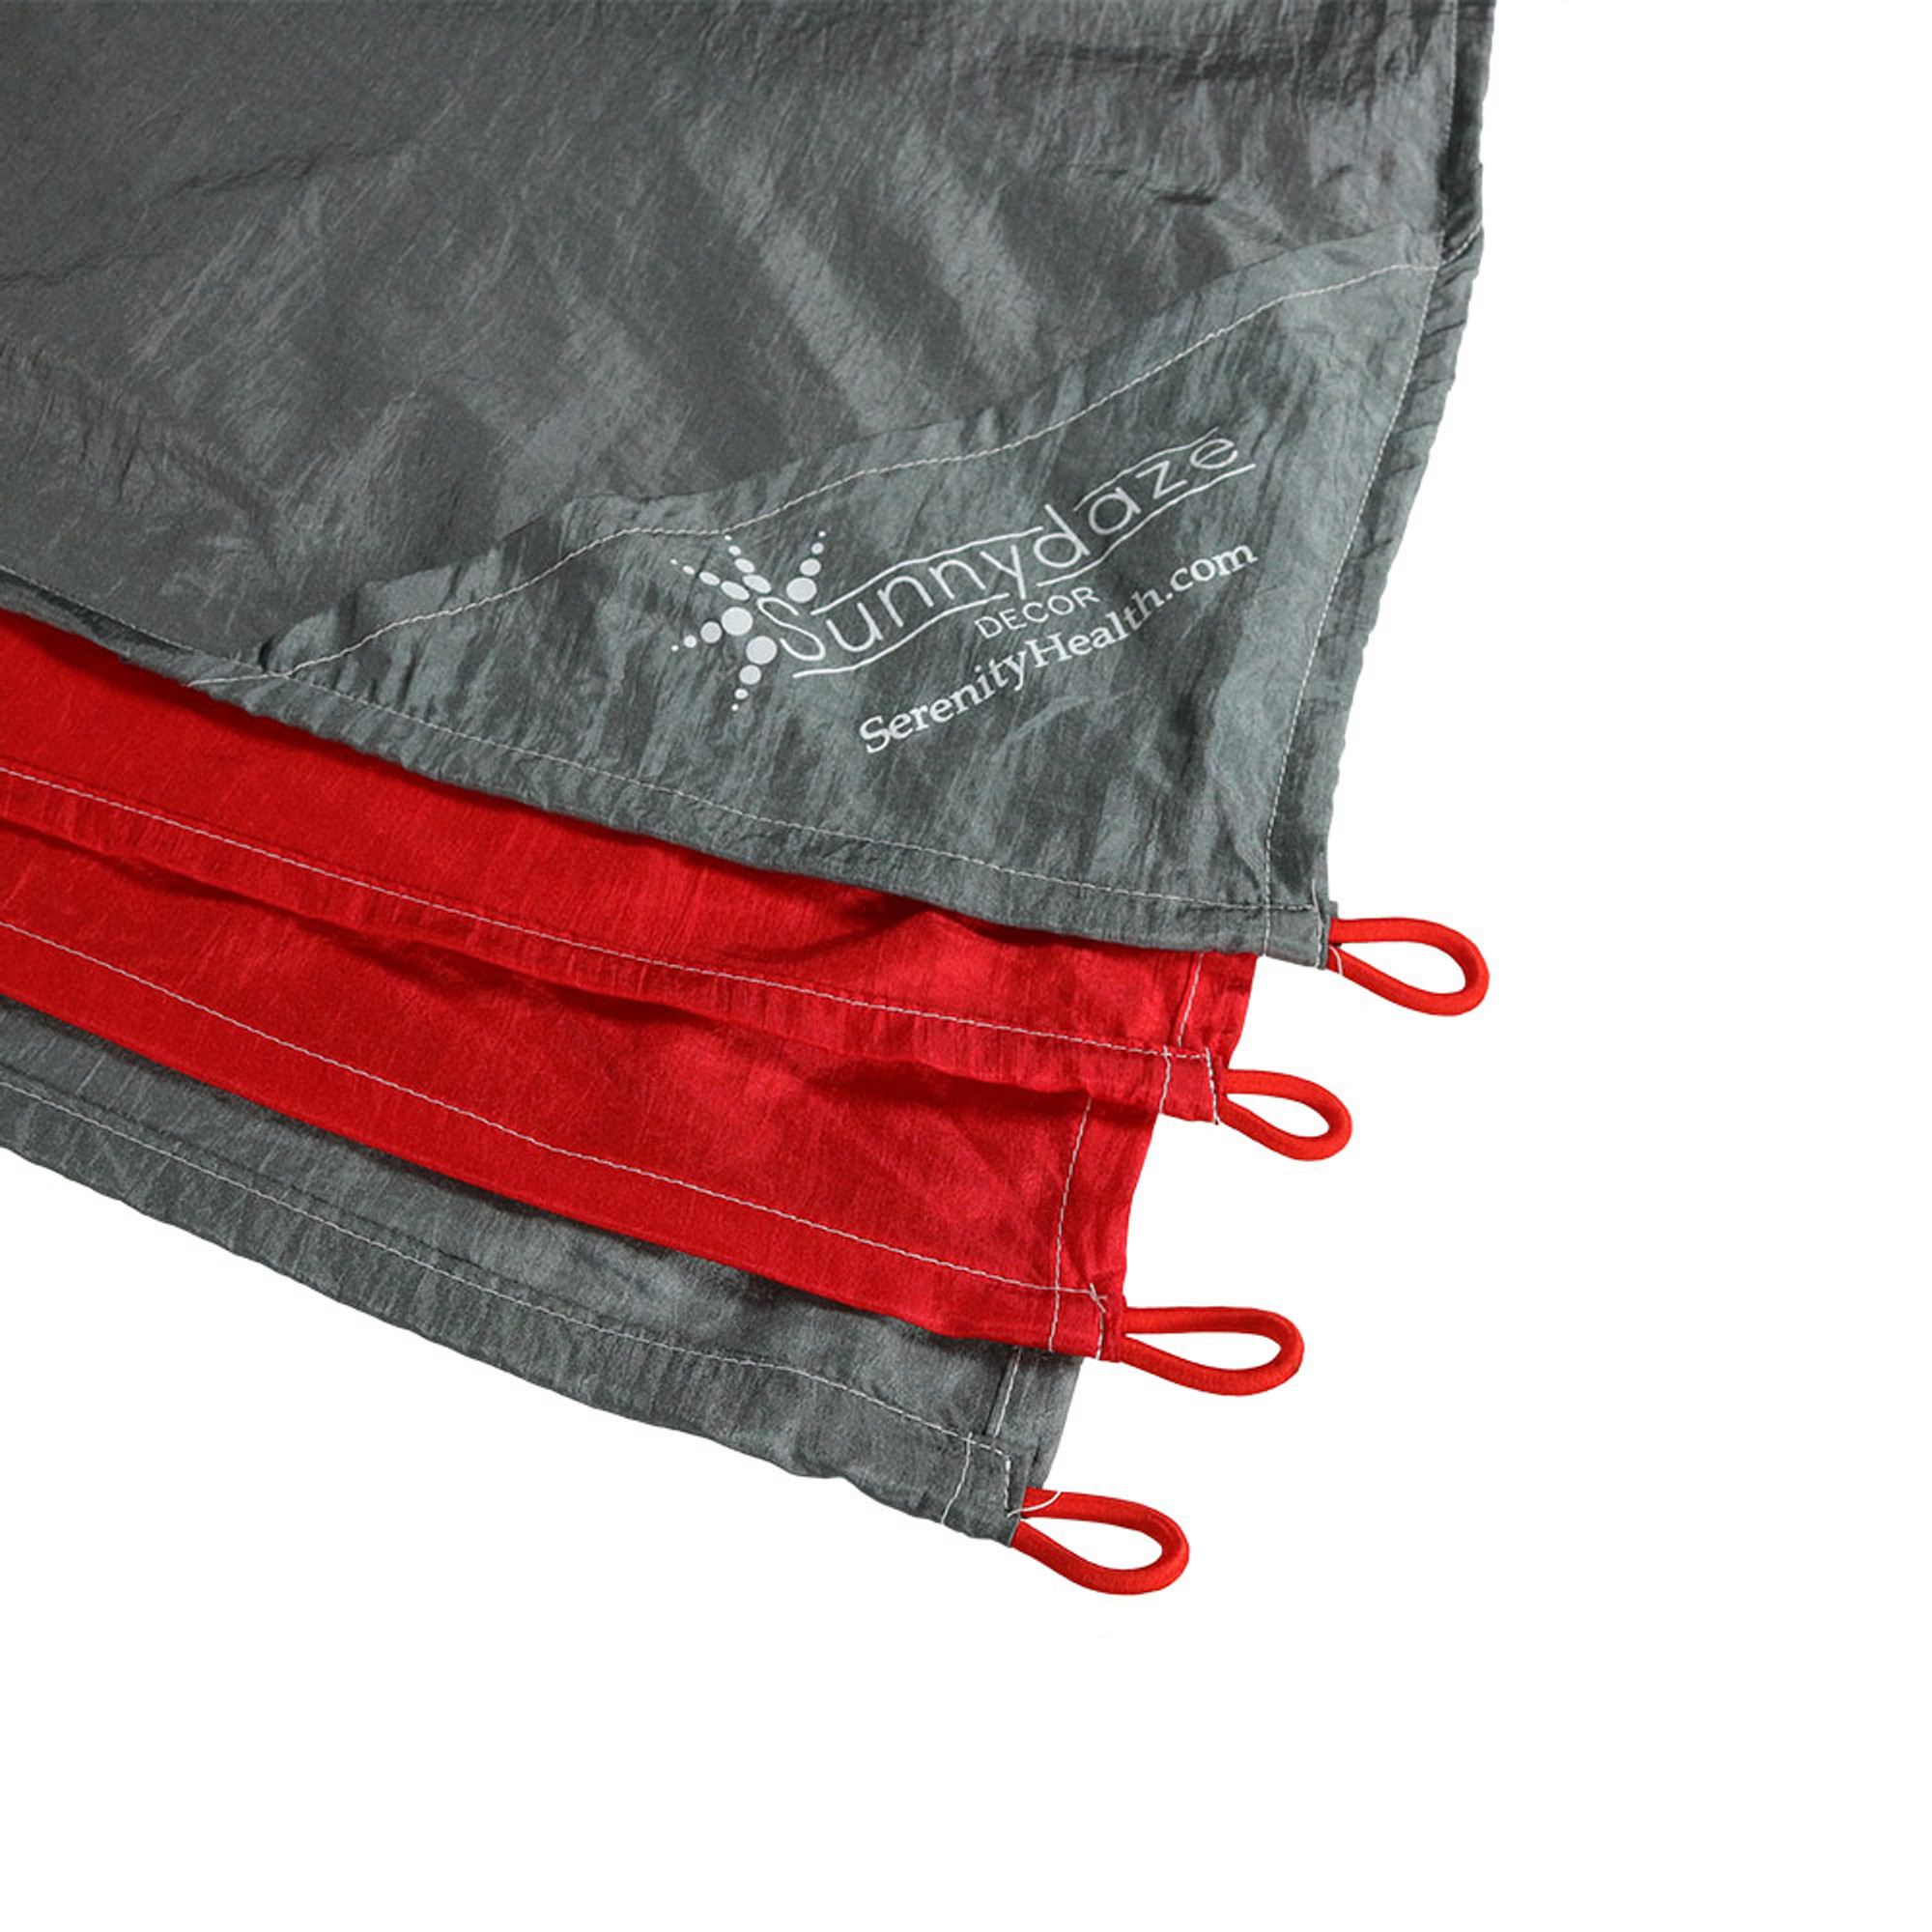 Sunnydaze Nylon Pocket Blanket: Perfect for Camping, the Beach & More!